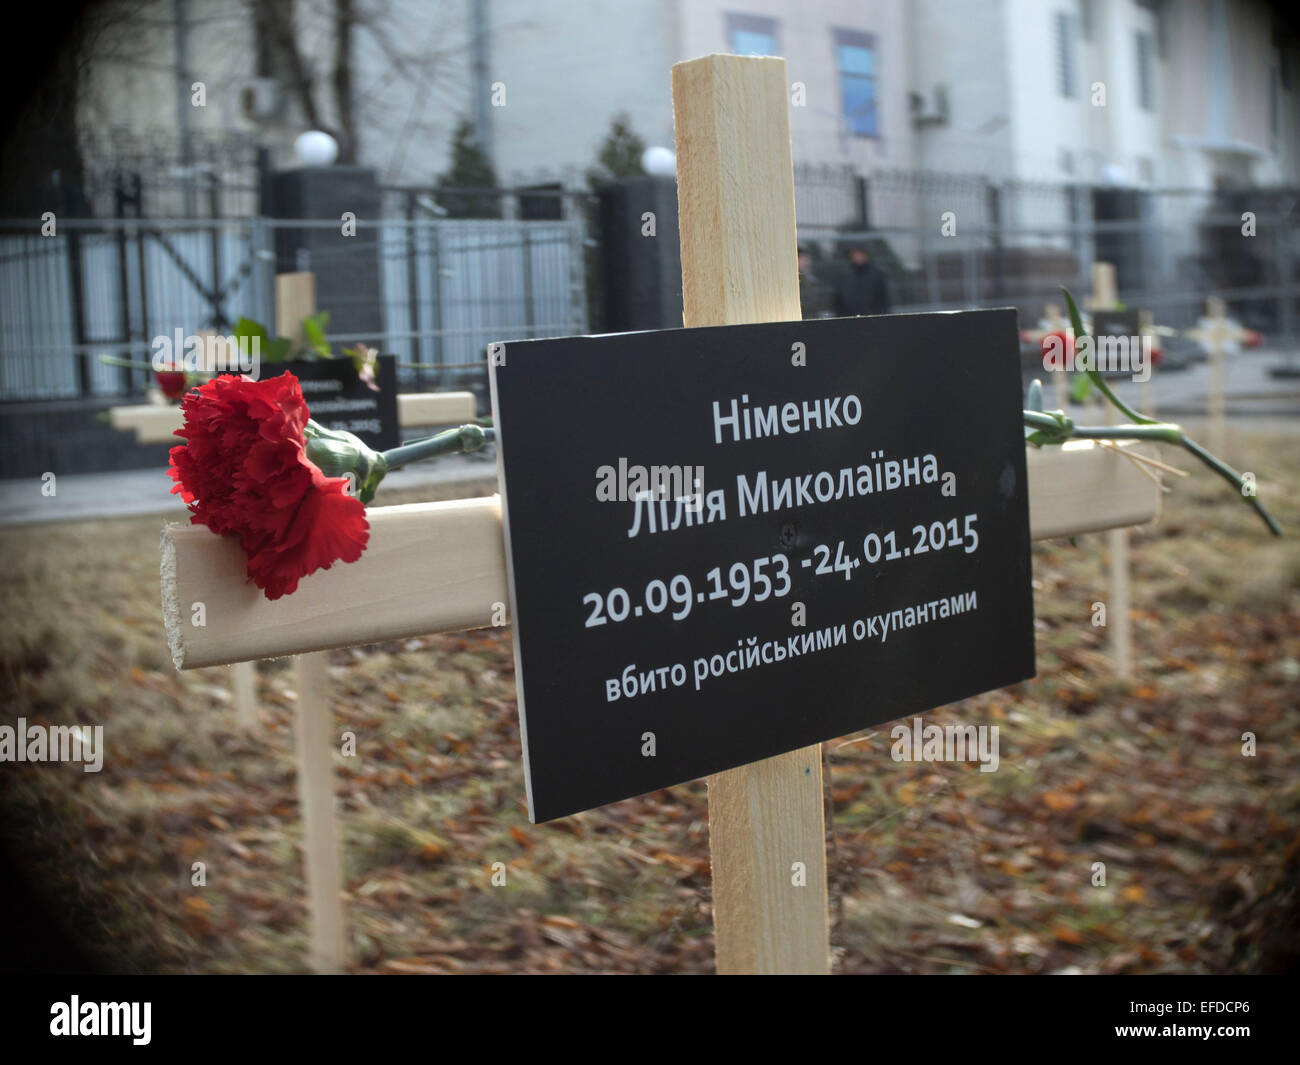 Crosses placed by activists and bearing the names of 30 people who died in shelling in Mariupol on Jan, 24 are seen in the foreground a cross with a sign that says 'Lily Nimenko, killed by Russian occupiers' near the Russian Embassy in Kiev, Ukraine, Sunday, Feb. 1, 2015. Stock Photo